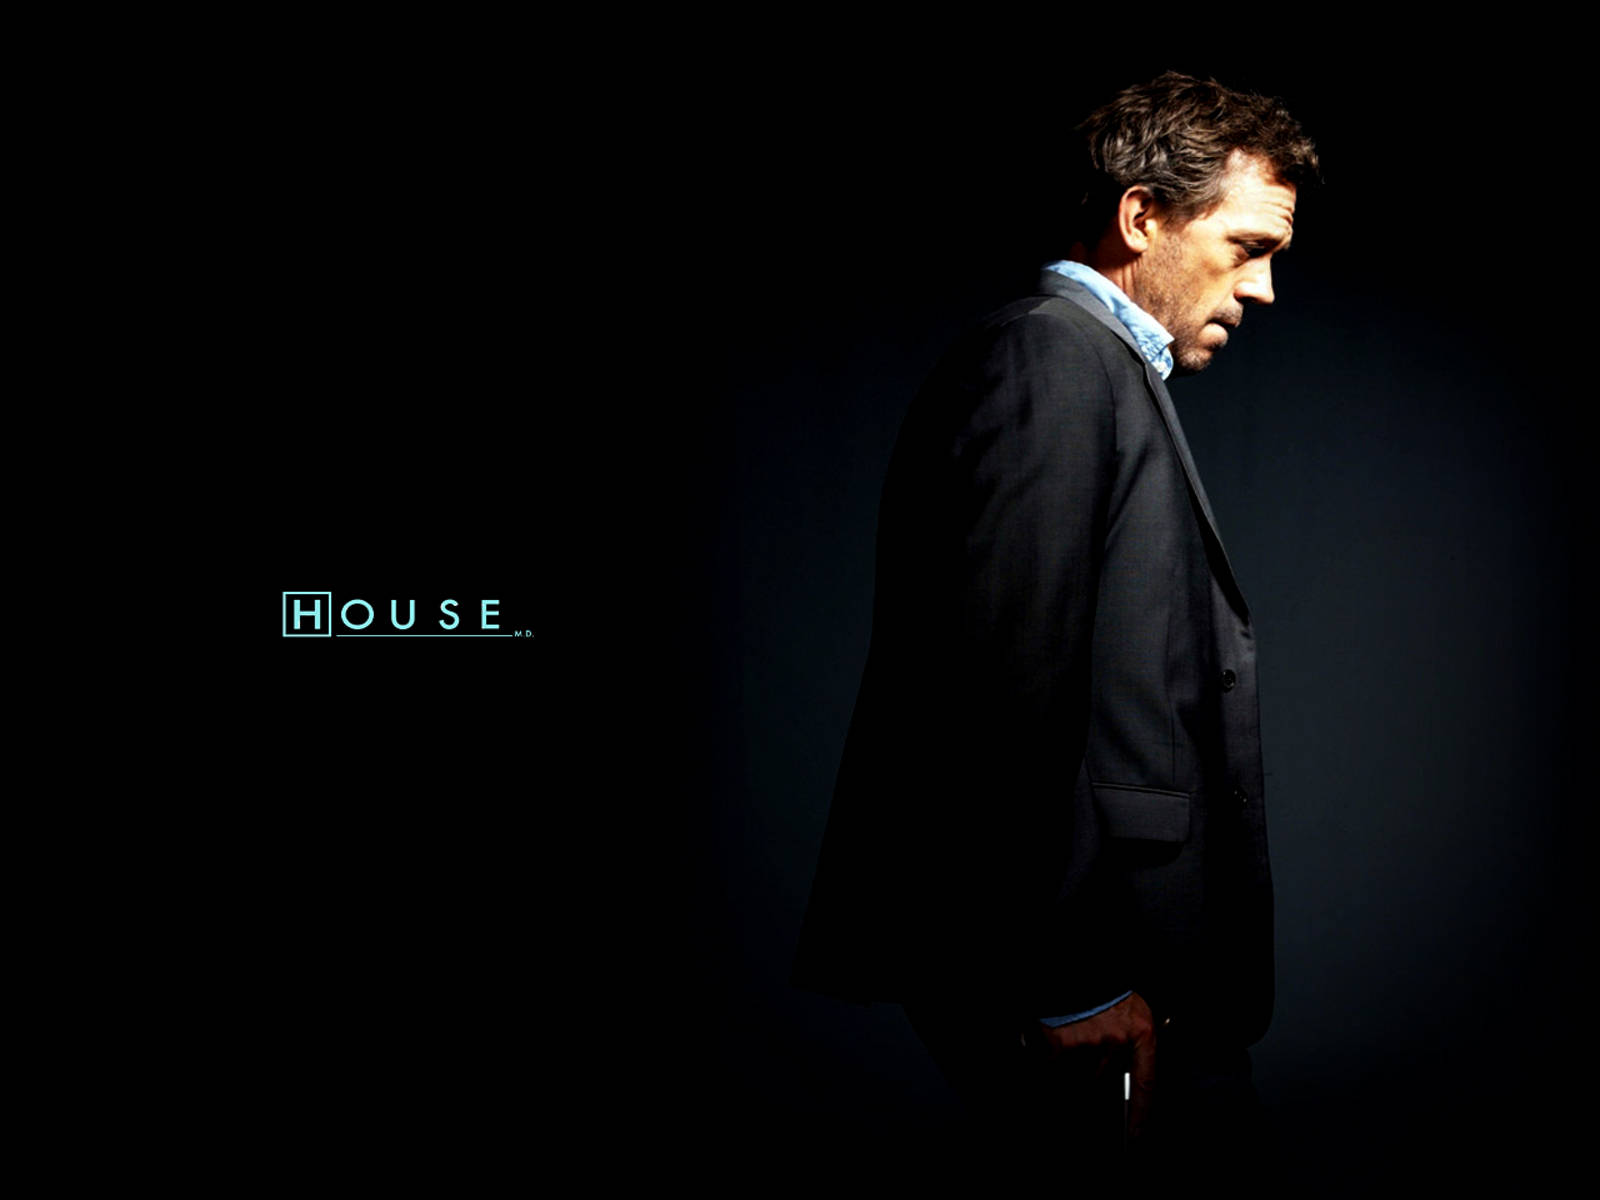 Hugh Laurie House Movie Poster Wallpaper